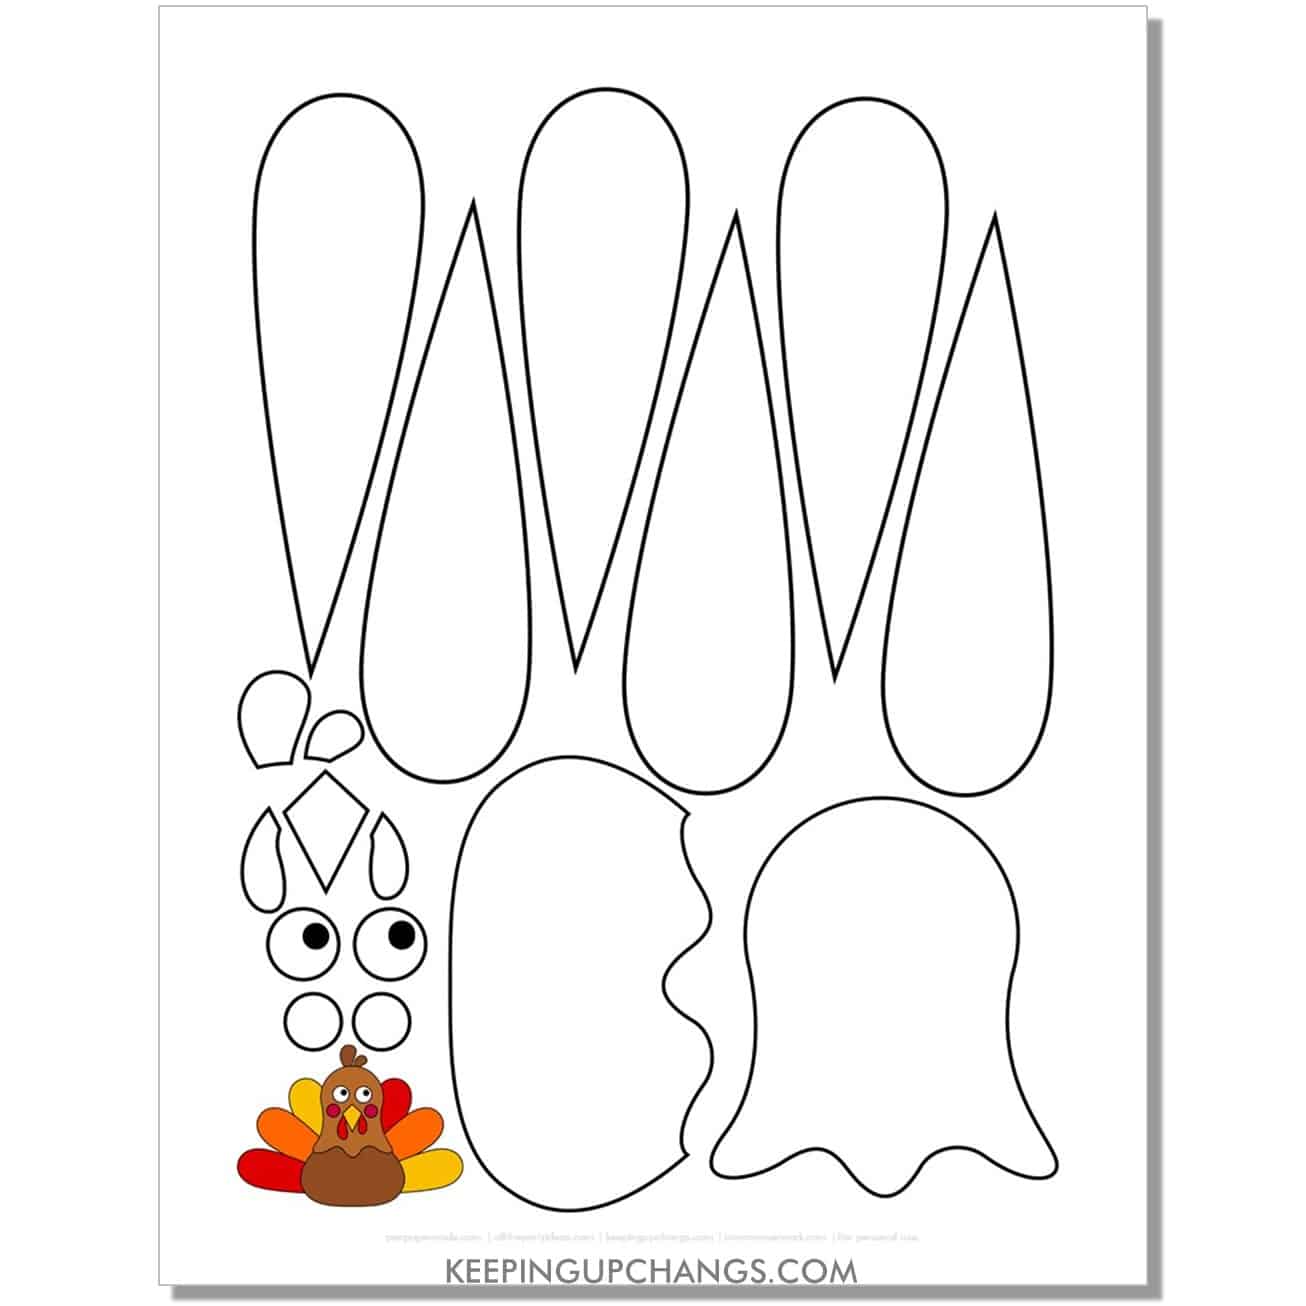 easy build a turkey template for toddler with feathers, body, hat, accessories in black, white.